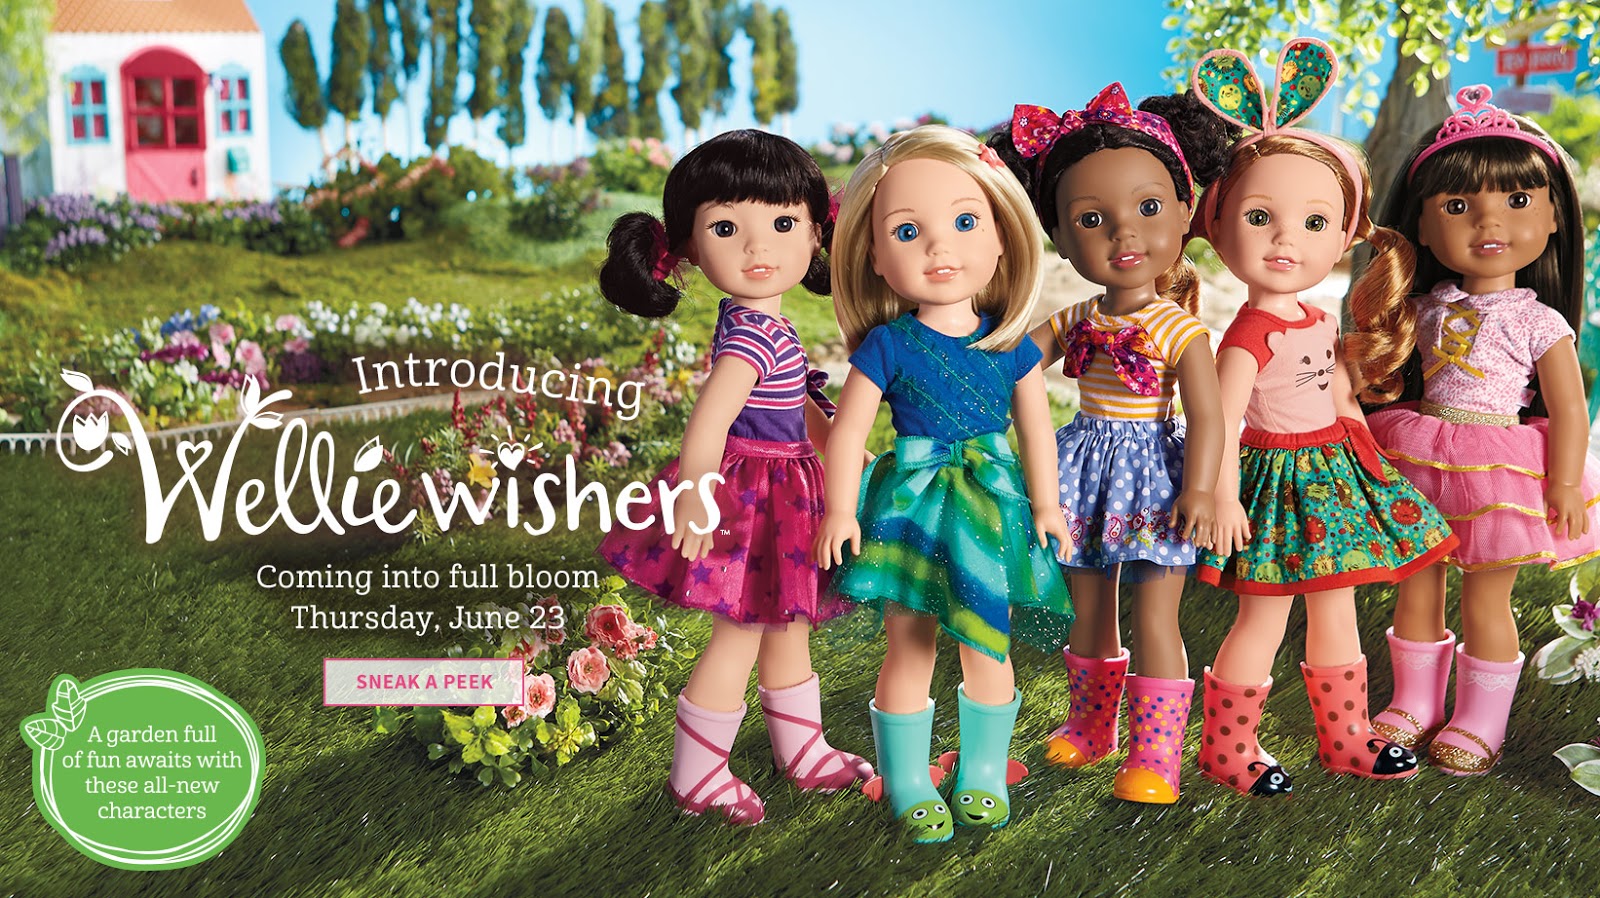 Pgh Momtourage: American Girl Coming to Ross Park Mall + Lea doll